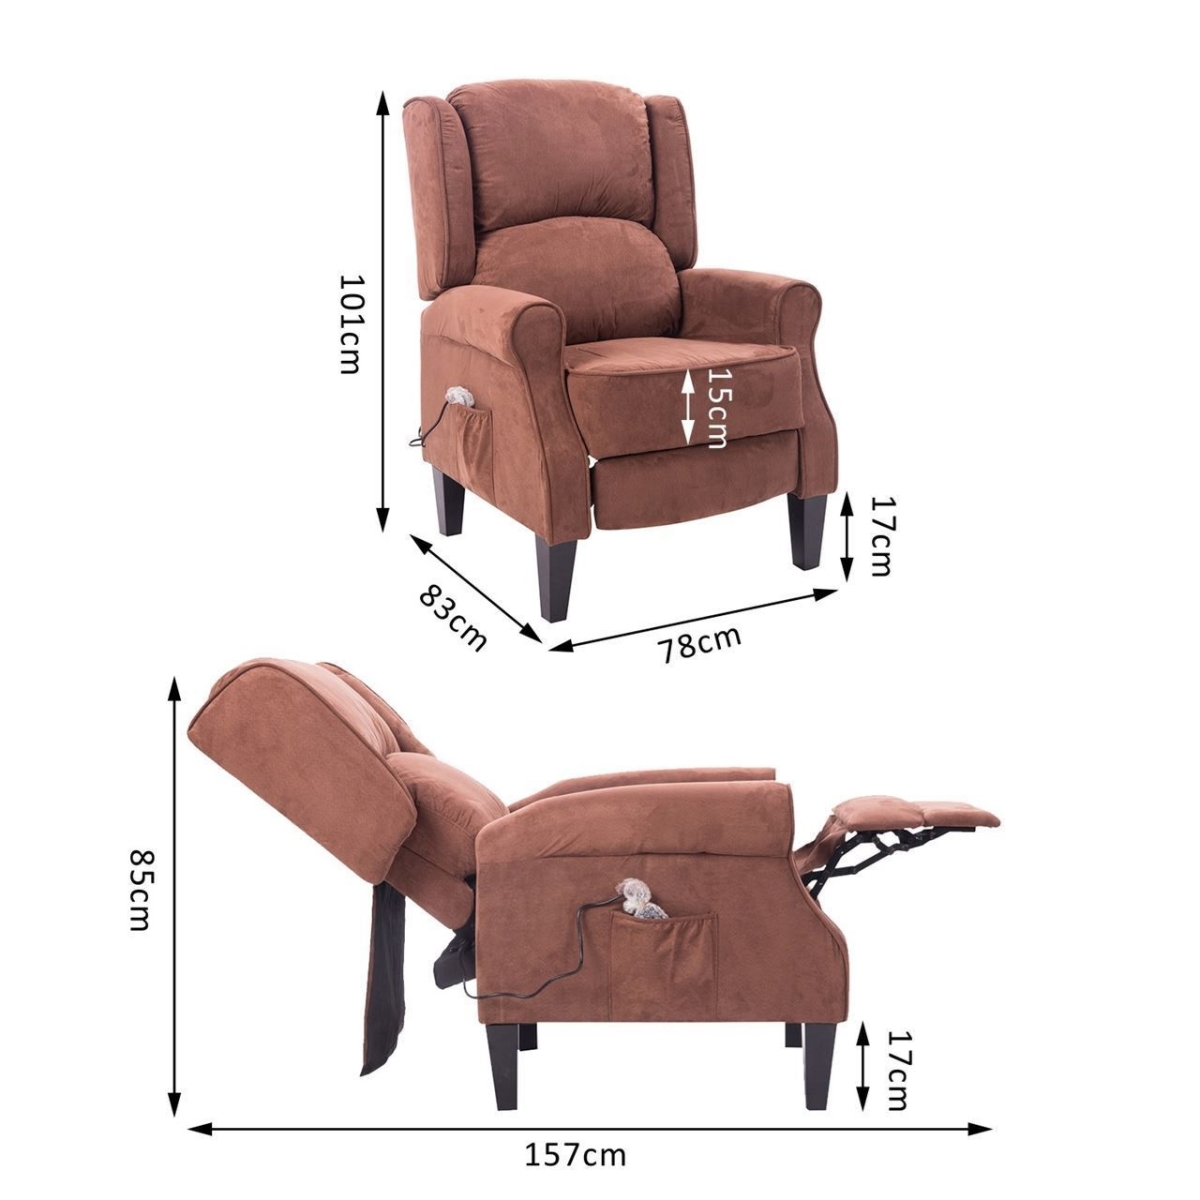 Online Gym Shop Cb16697 Heated Vibrating Suede Massage Recliner Chair, Brown